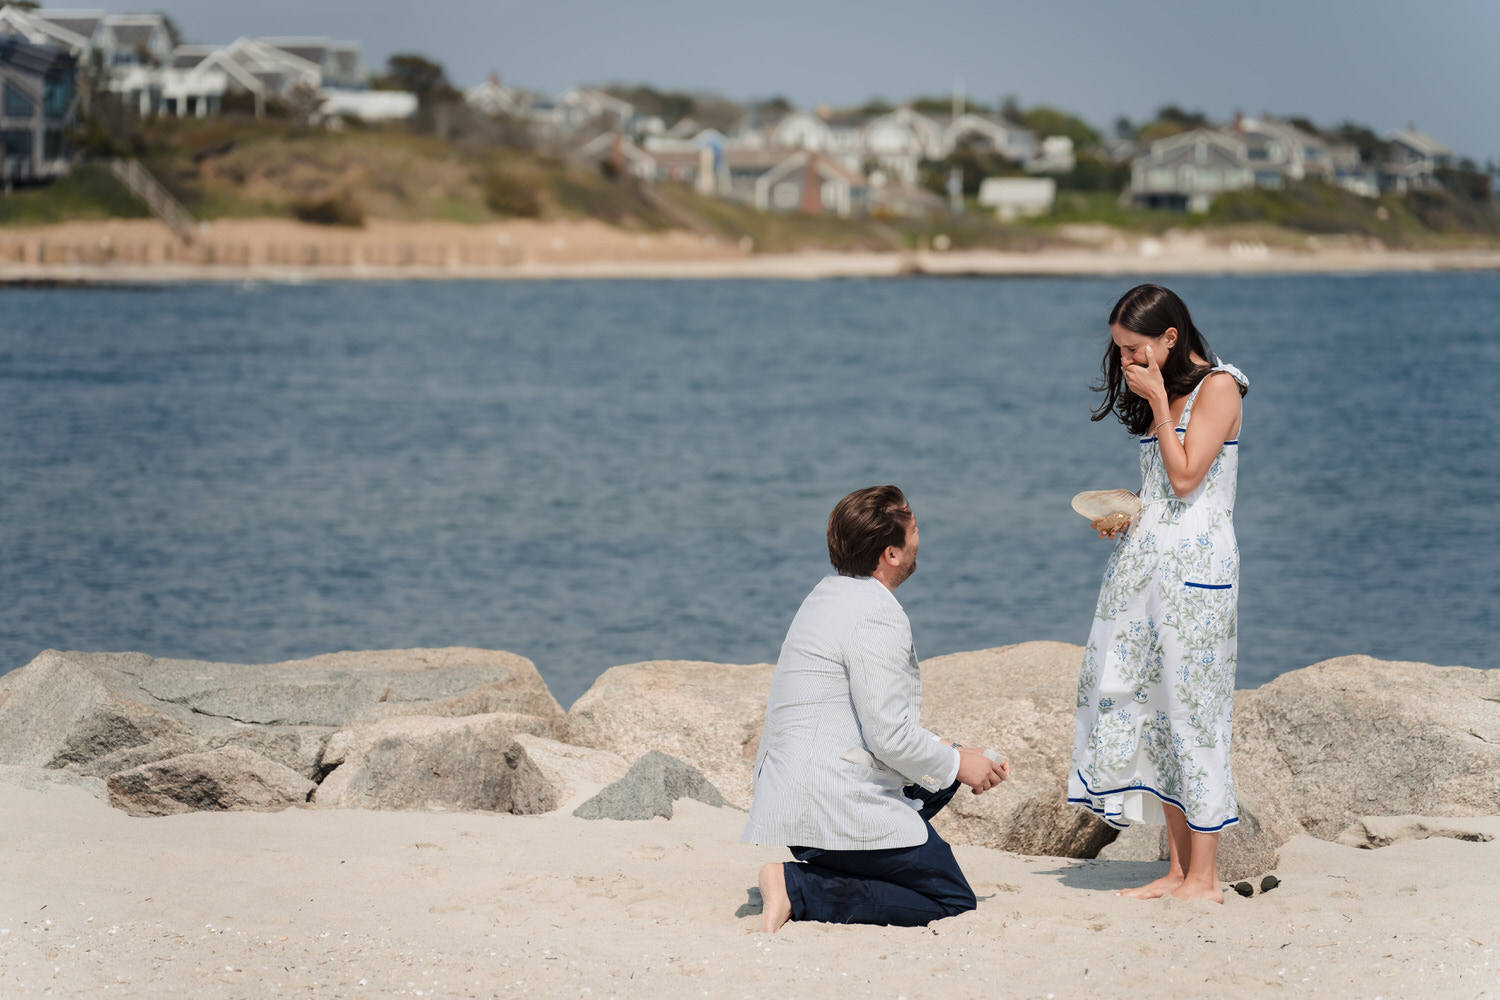 A man proposes to a woman in Boston with the help of a professional proposal photographer.